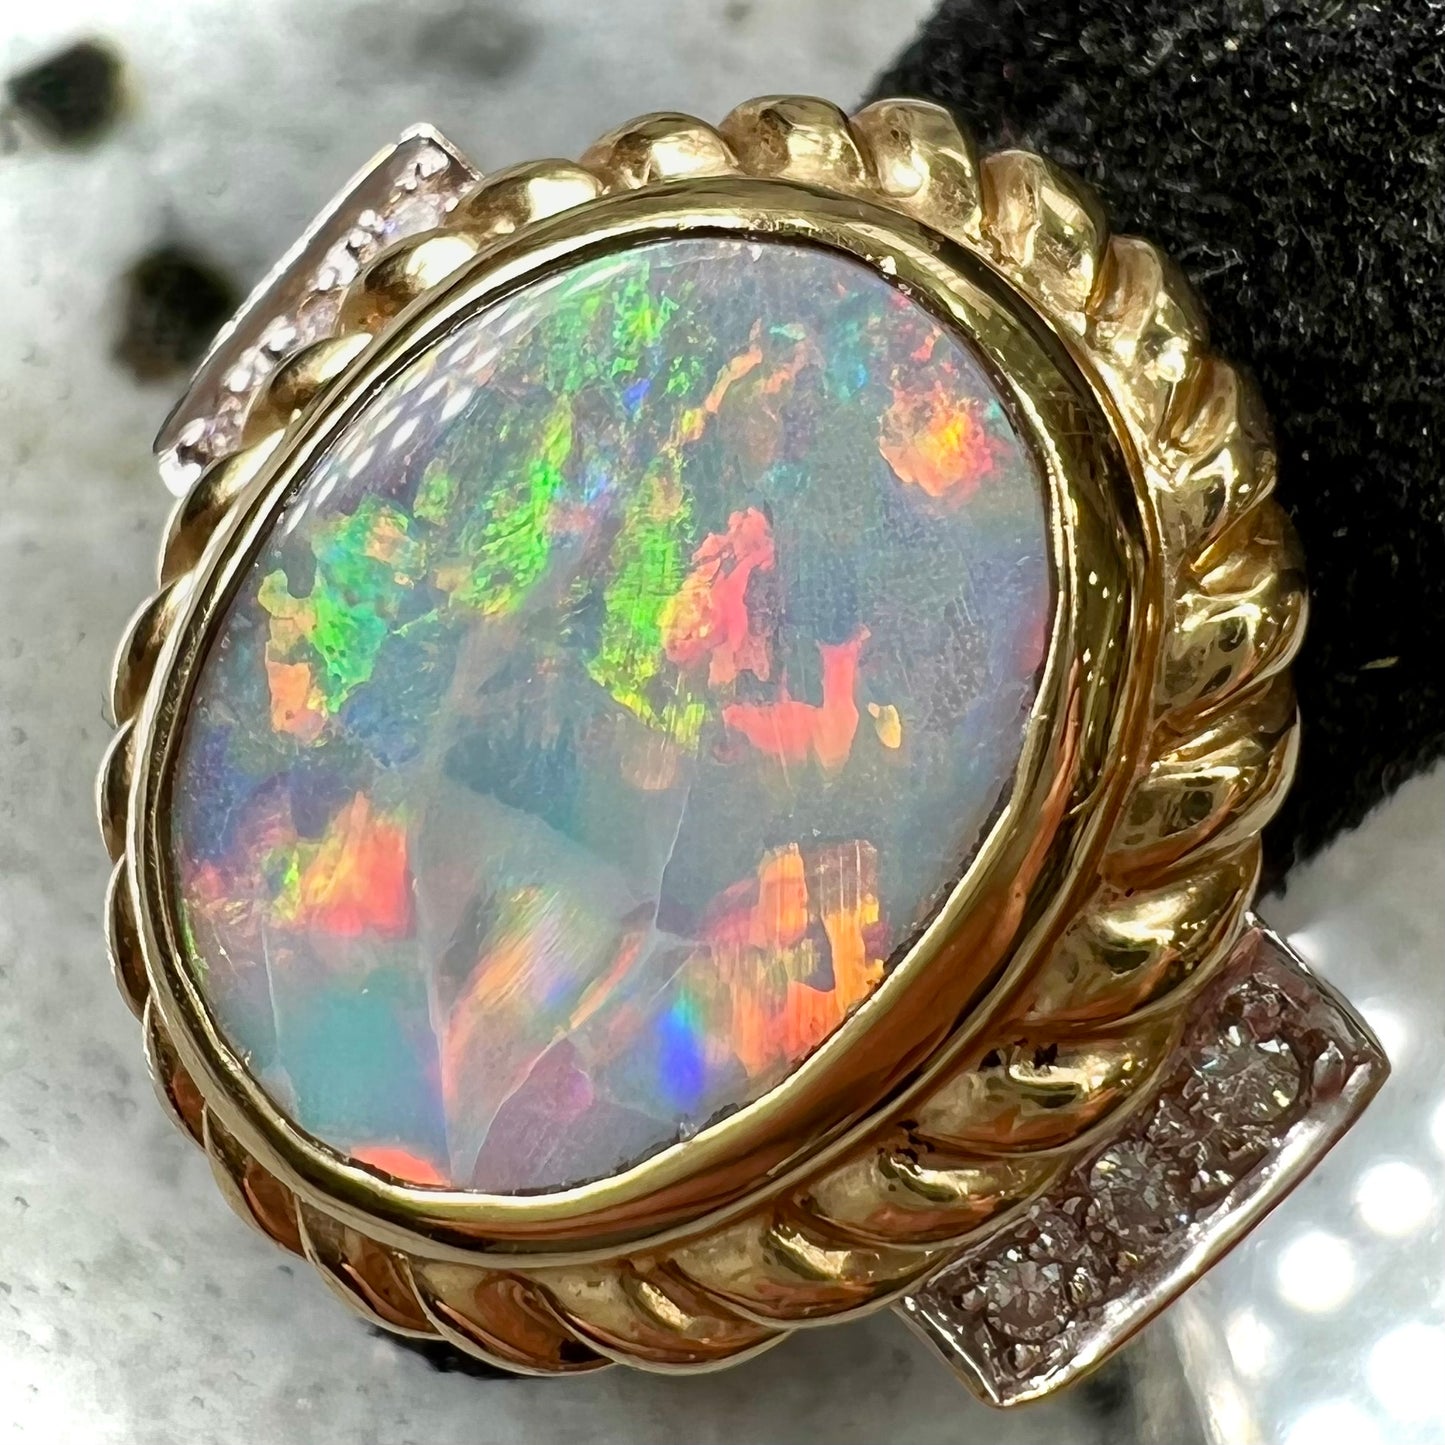 A ladies' Lightning Ridge semi-black opal ring cast in yellow gold and set with diamond accents.